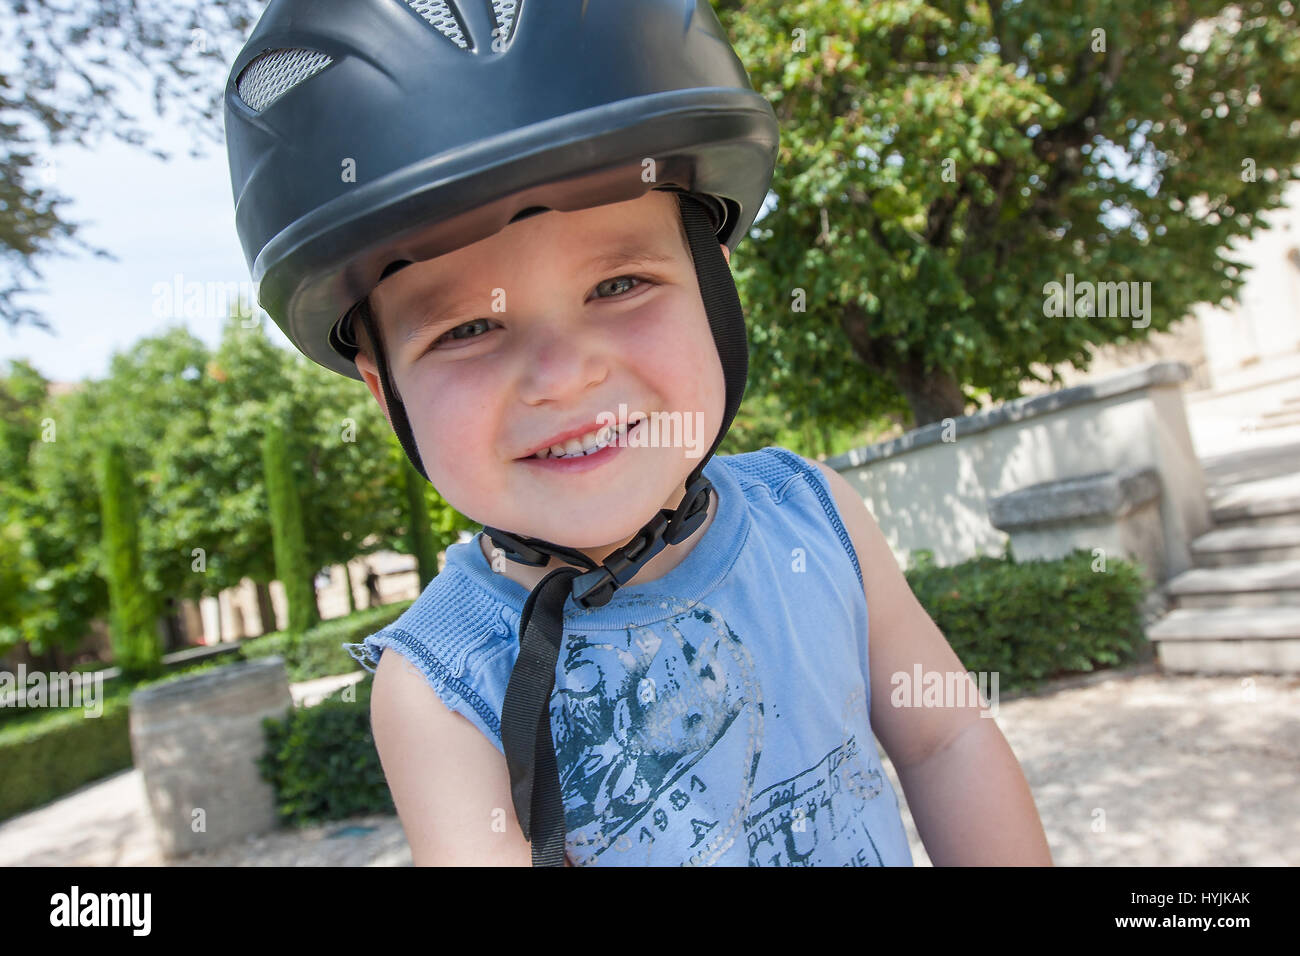 A boy wearing a horse riding helmet is smiling Stock Photo